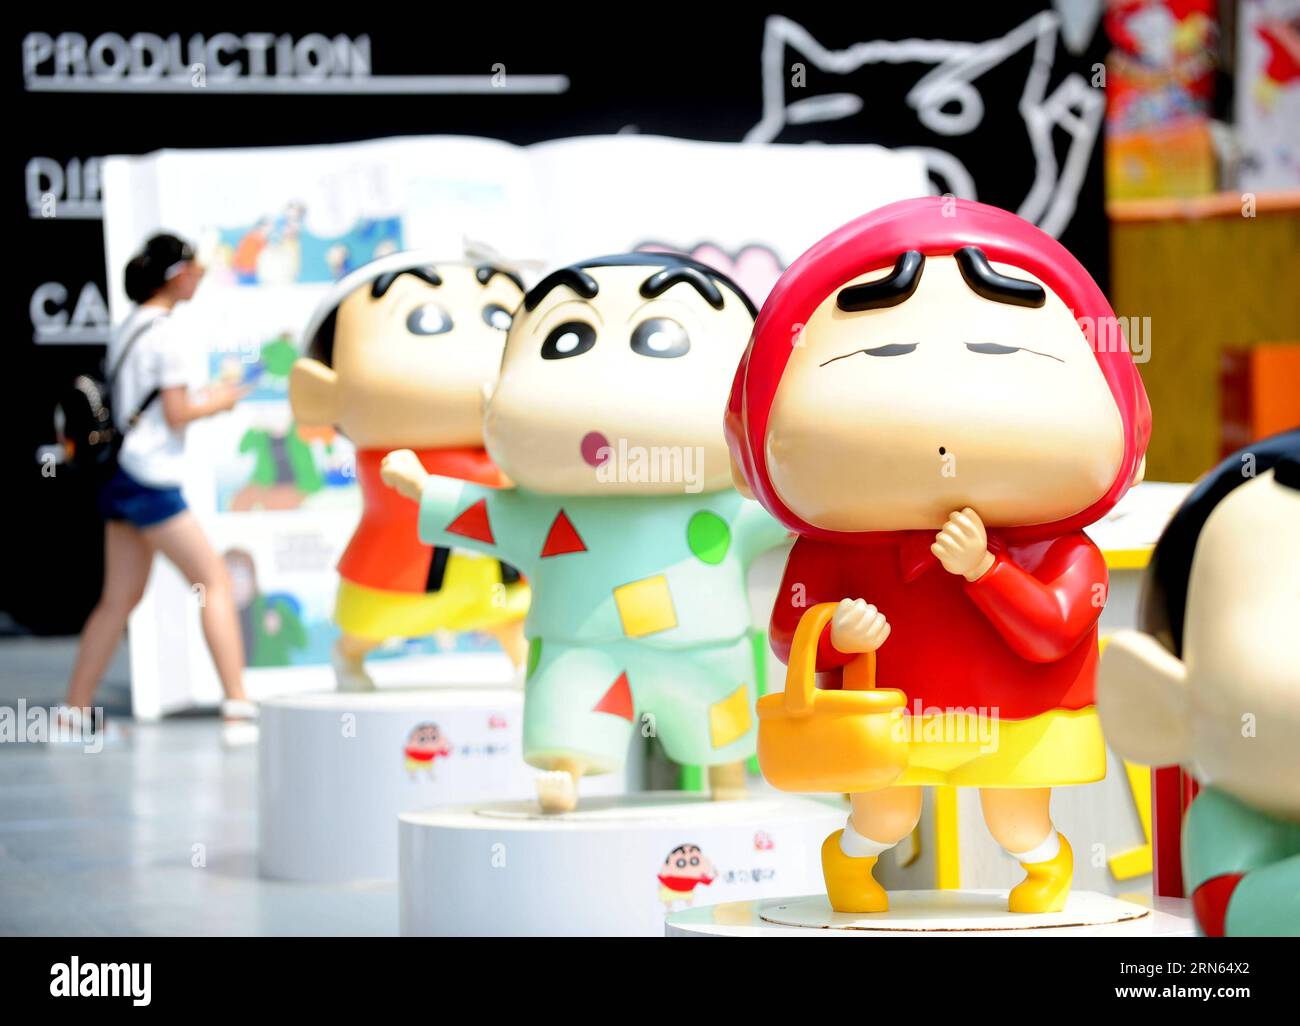 (150711) -- SHENYANG, July 11, 2015 -- A citizen visits an exhibition marking the 25th anniversary of Japanese manga series Crayon Shin-chan in Shenyang, northeast China s Liaoning Province July 11, 2015. Dozens of manga and theatrical version of Crayon Shin-chan and related figures were displayed on the exhibition that opened to public on Saturday. (mcg) CHINA-SHENYANG-CRAYON SHIN-CHAN-25TH ANNIVERSARY(CN) ZhangxWenkui PUBLICATIONxNOTxINxCHN   150 711 Shenyang July 11 2015 a Citizen visits to Exhibition marking The 25th Anniversary of Japanese Manga Series crayon Shin Chan in Shenyang Northea Stock Photo